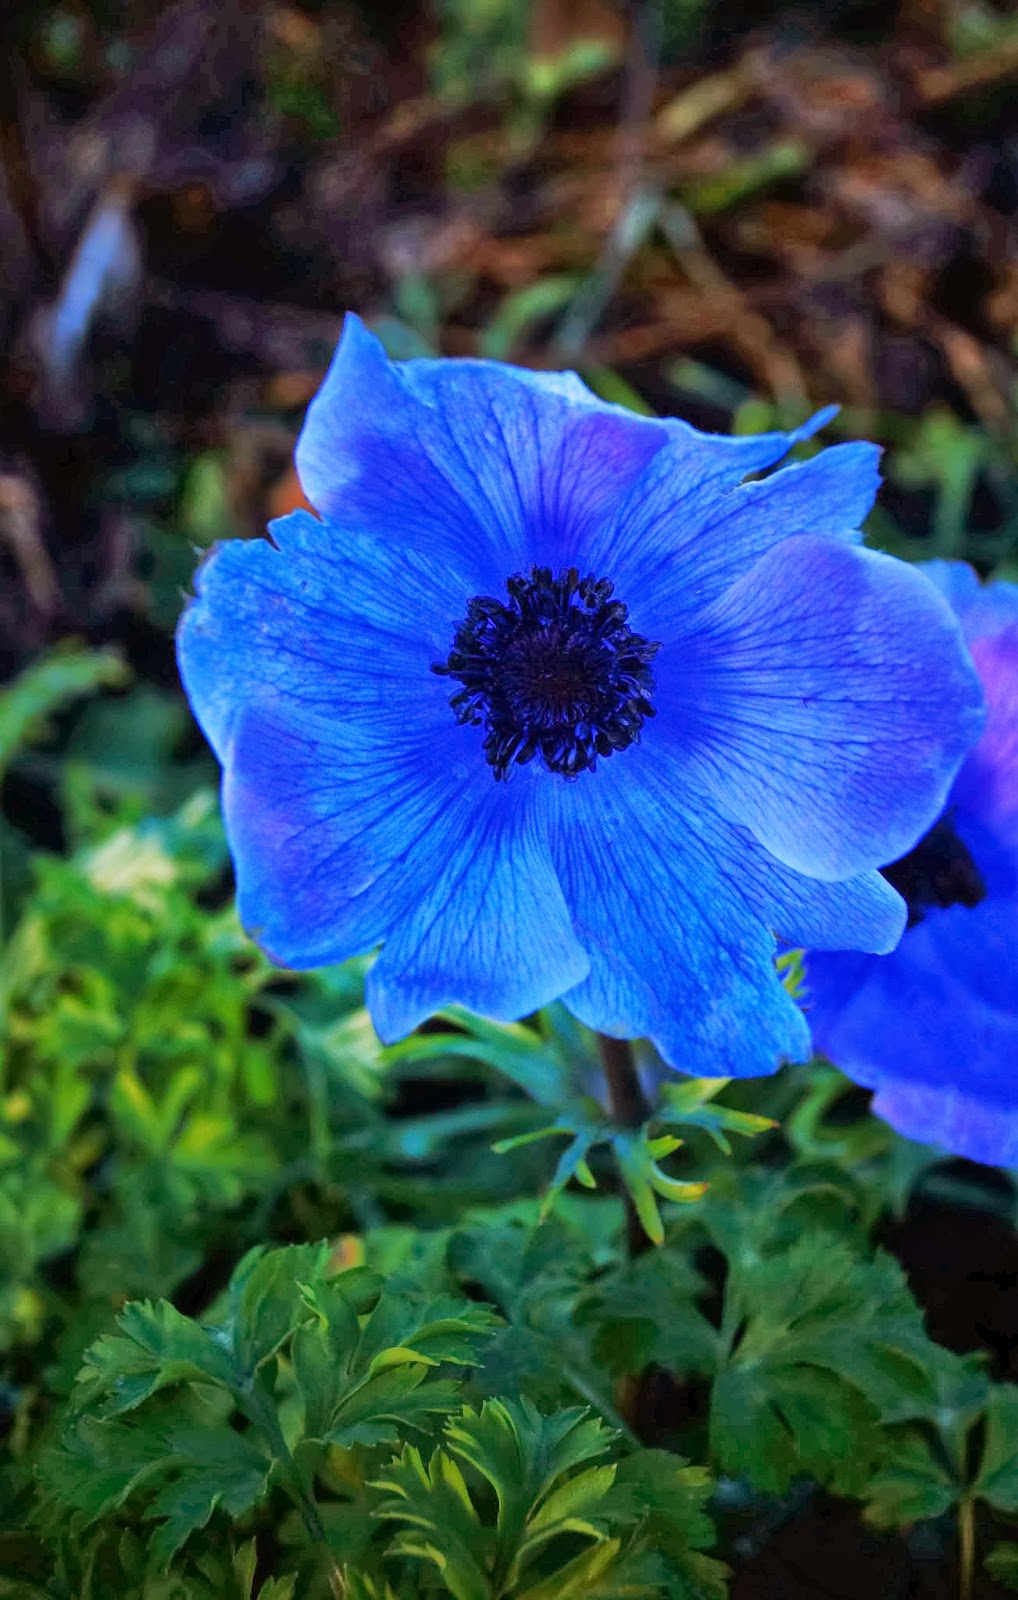 A little duo of happiness, two blue anemones  - 'Grow Our Own' Allotment Blog